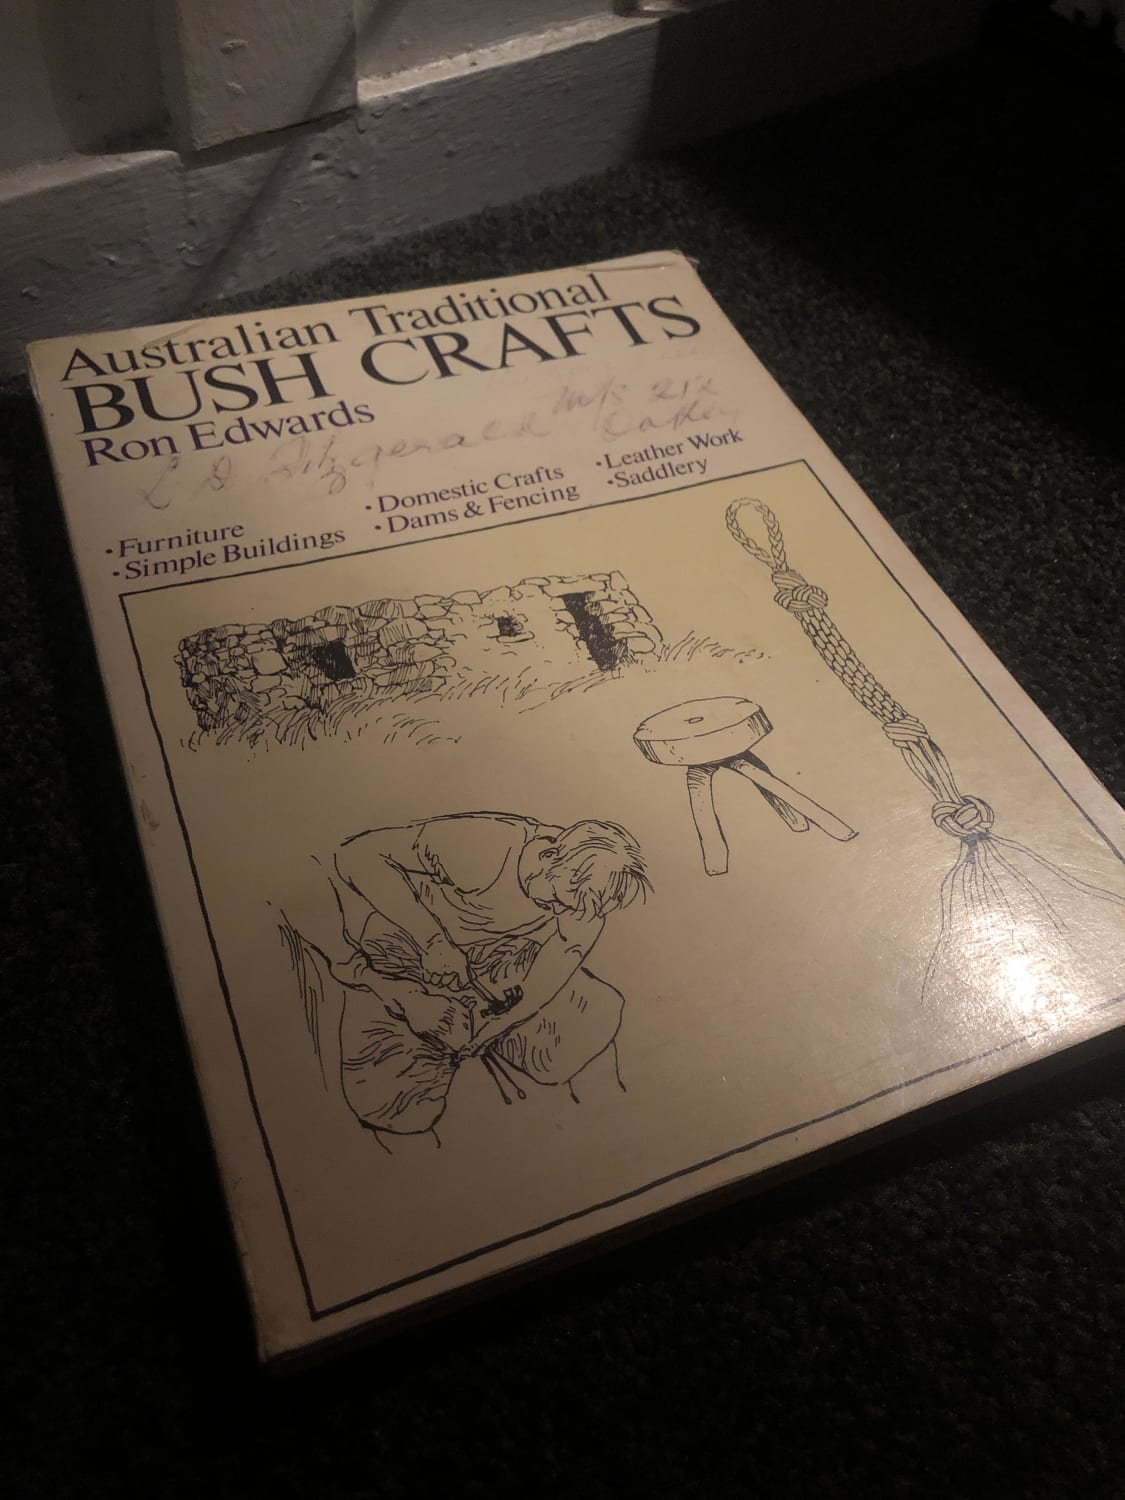 Just wanted to share this excellent book for Bush craft. Covers everything you’d want to know. The author has multiple great books if you can find some